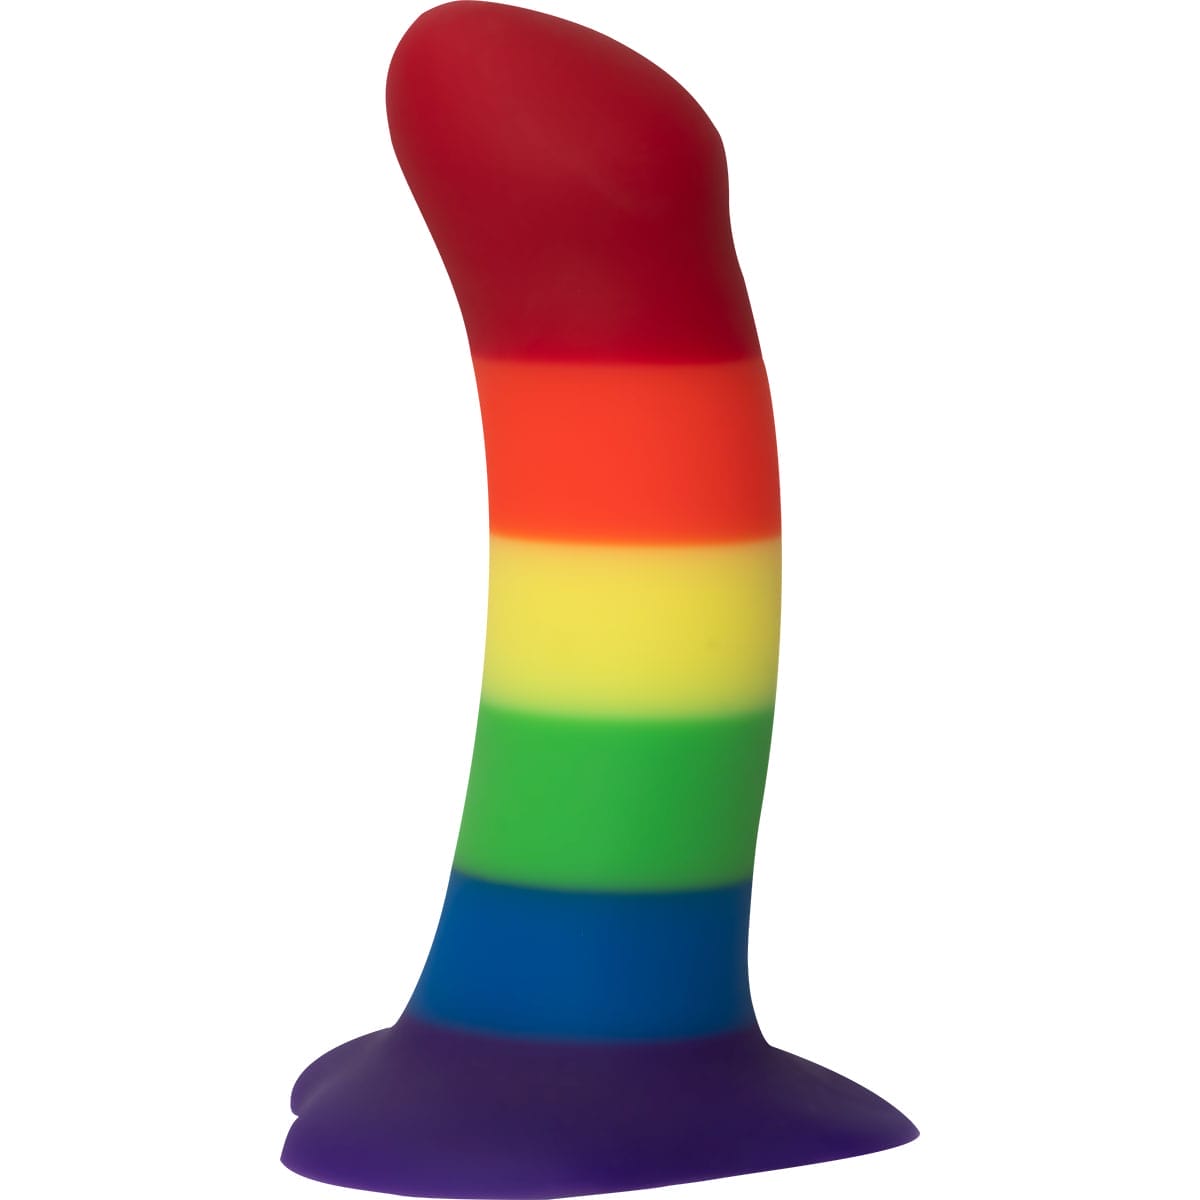 Buy Fun Factory Limited Edition Rainbow Amor Dil 5.3 long and 1.2 thick dildo made by Fun Factory.